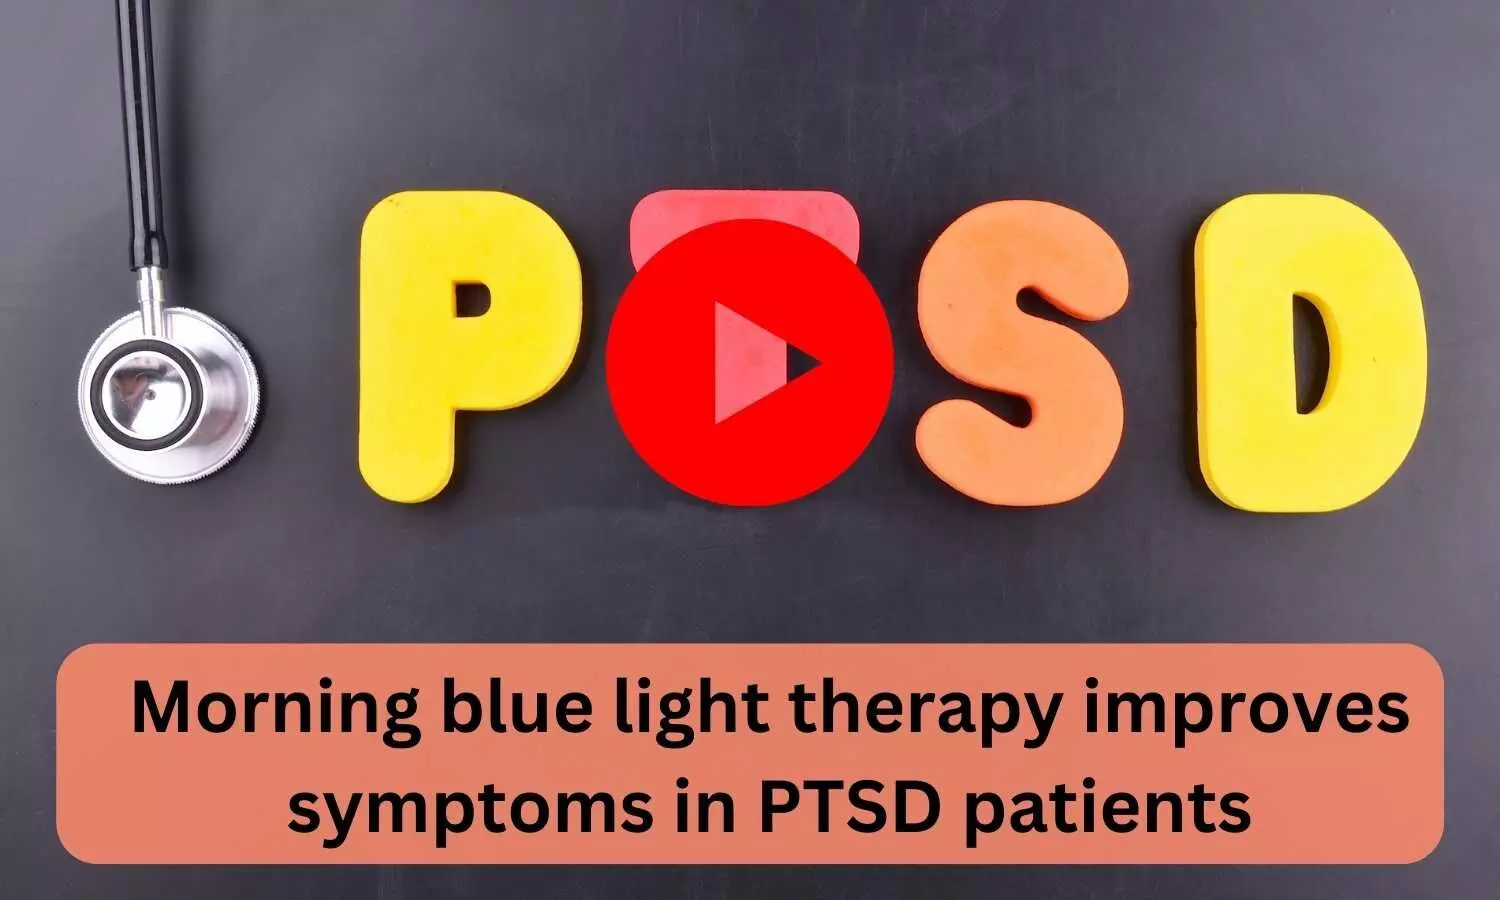 Morning blue light therapy improves symptoms in PTSD patients